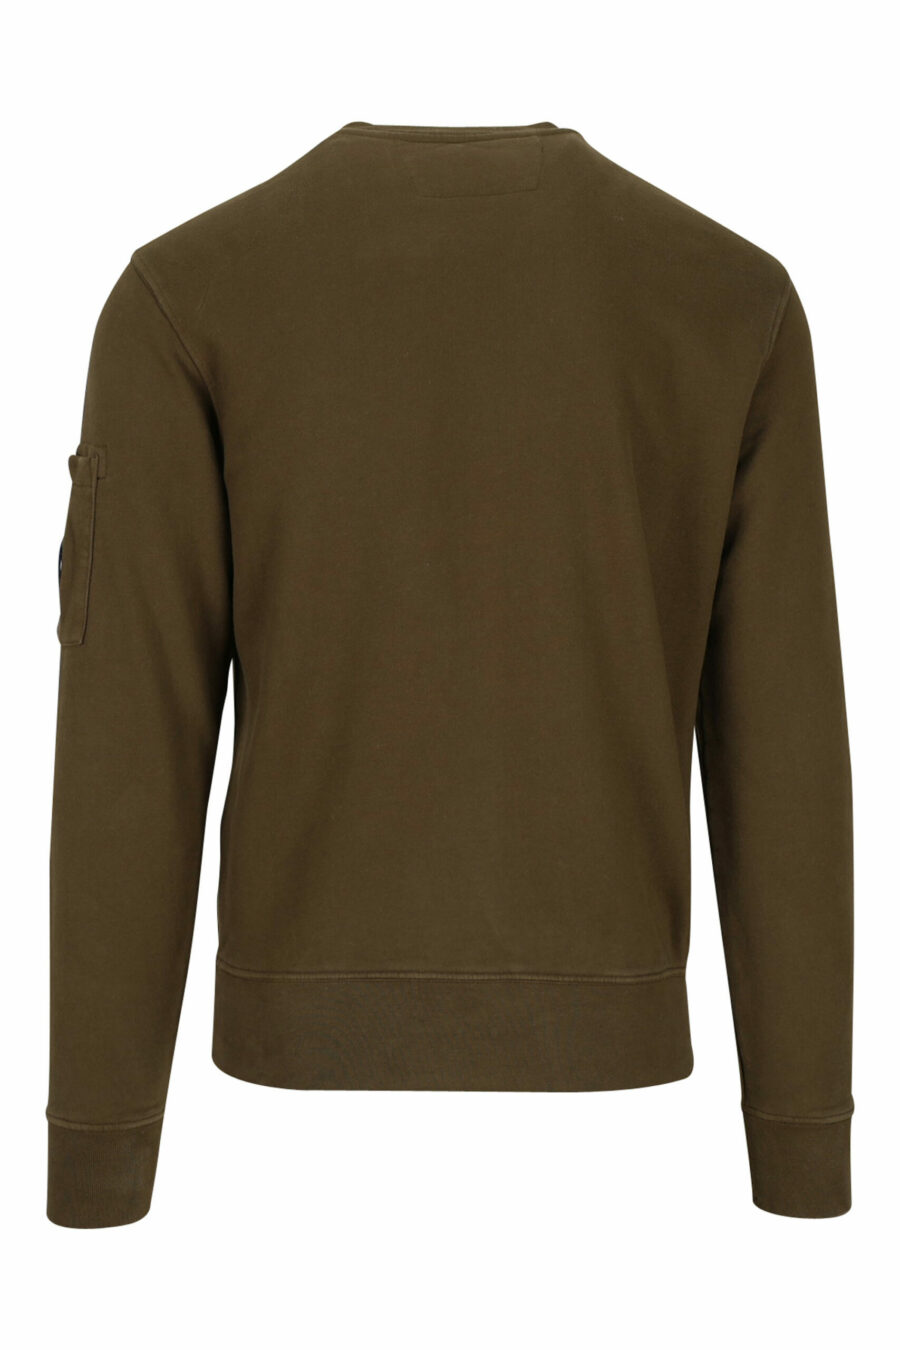 Military green sweatshirt with side logo lens - 7620943598582 2 scaled